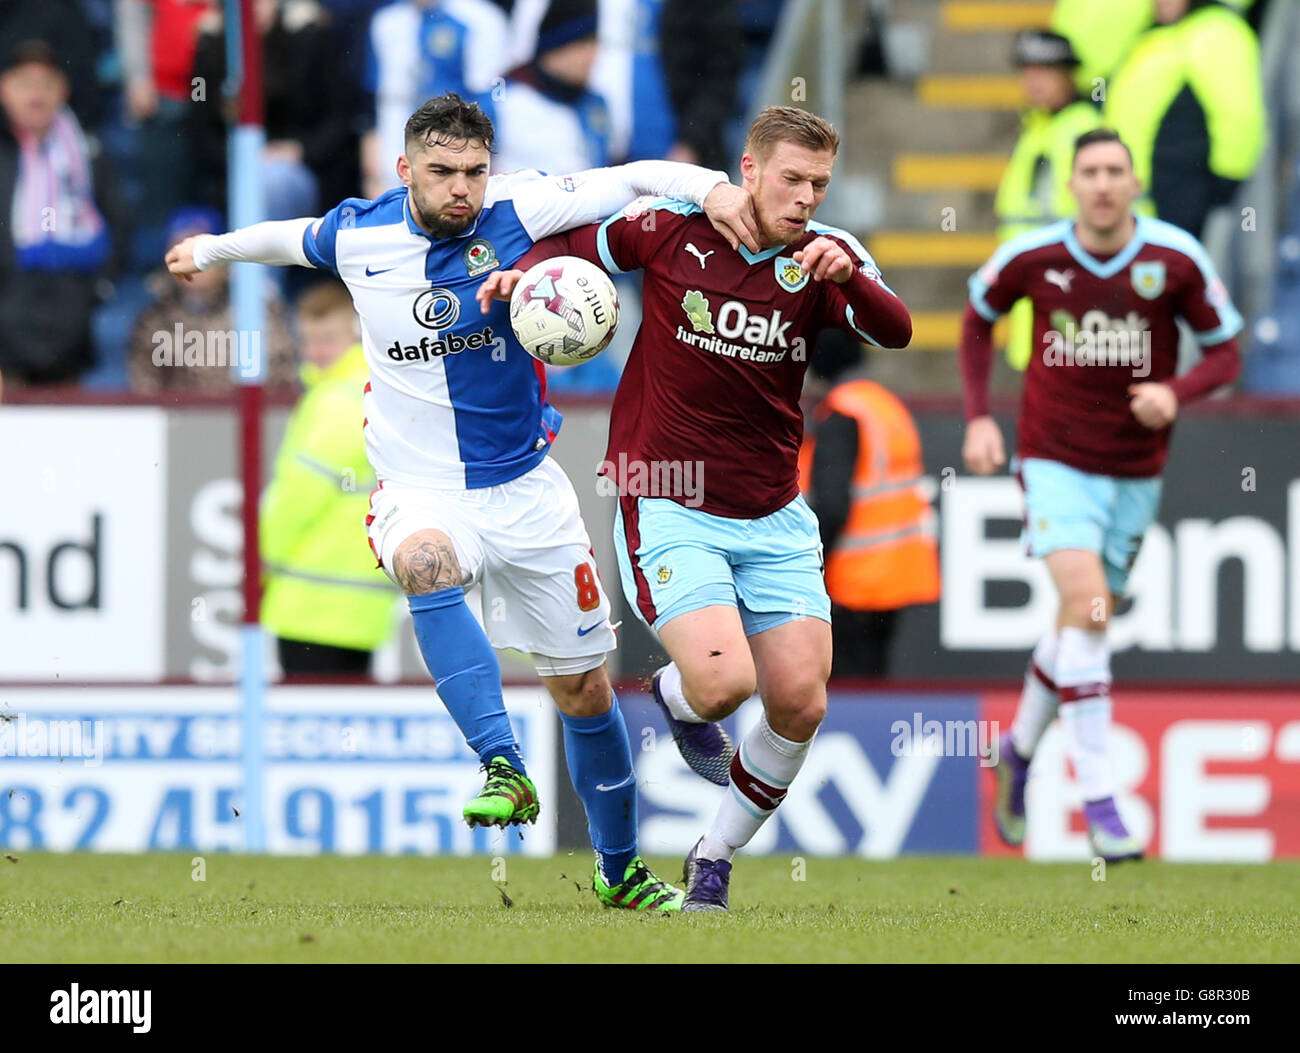 Blackburn Rovers' Tony Watt (left) and Burnley's Rouwen Hennings battle for the ball during the Sky Bet Championship match at Turf Moor, Burnley. Stock Photo